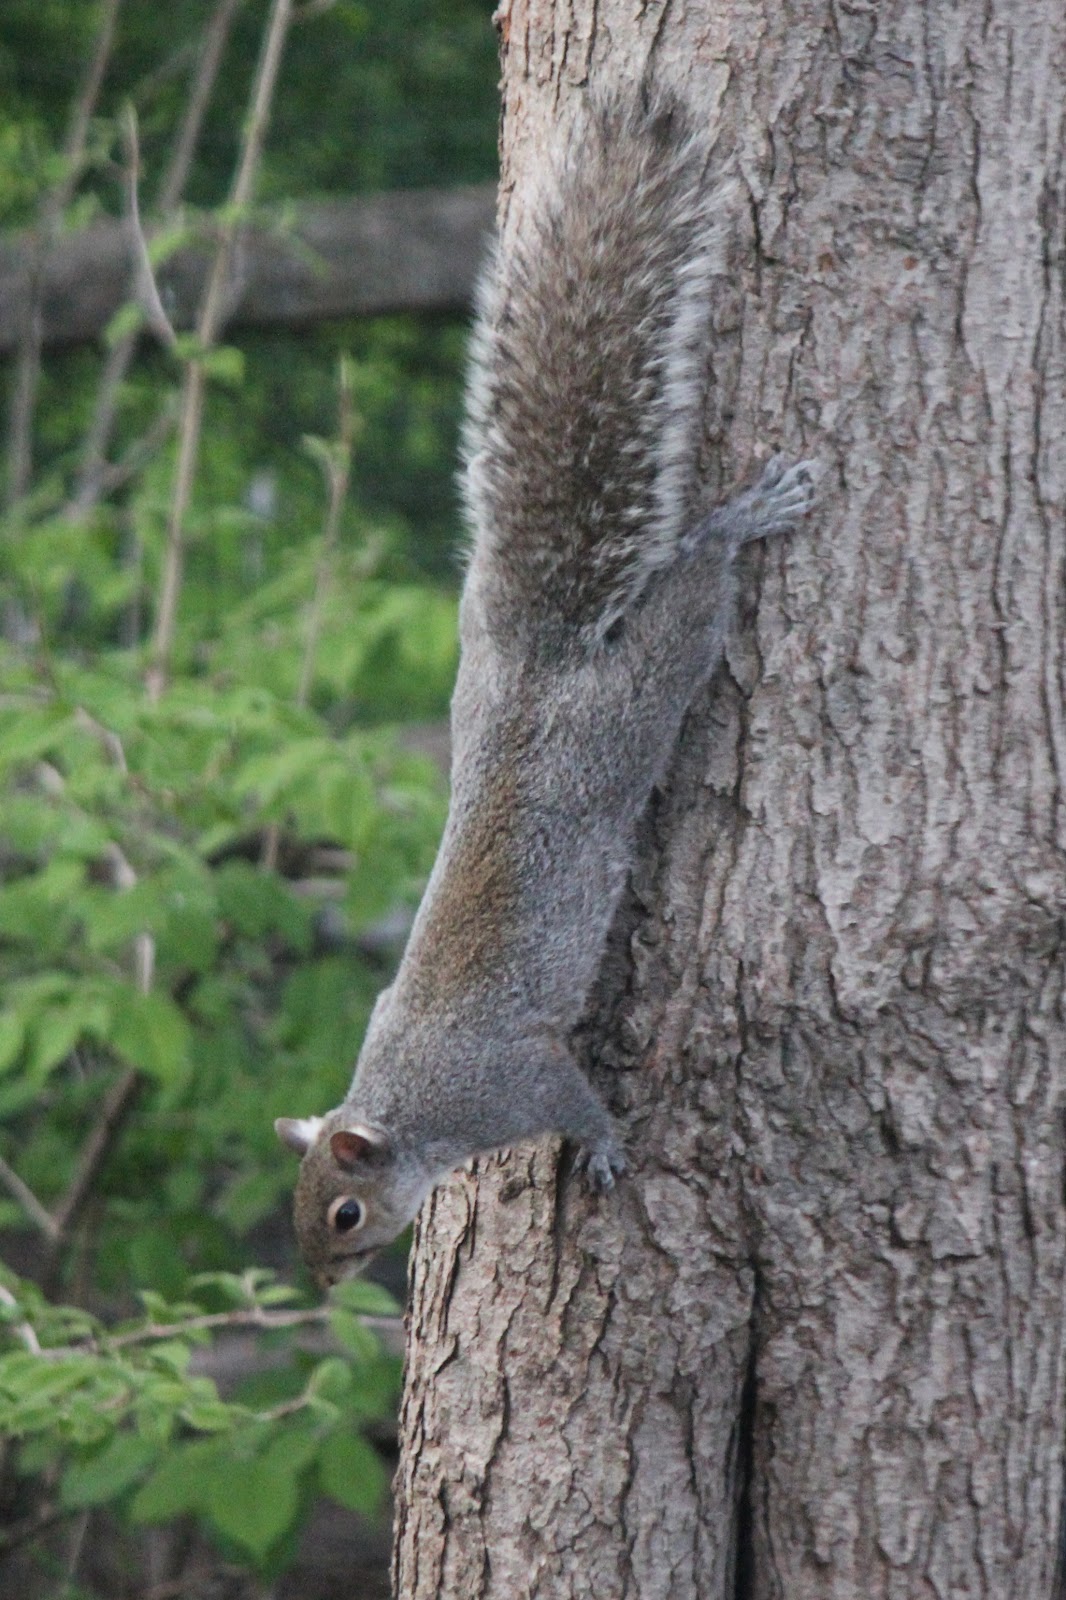 A squirrel on a tree